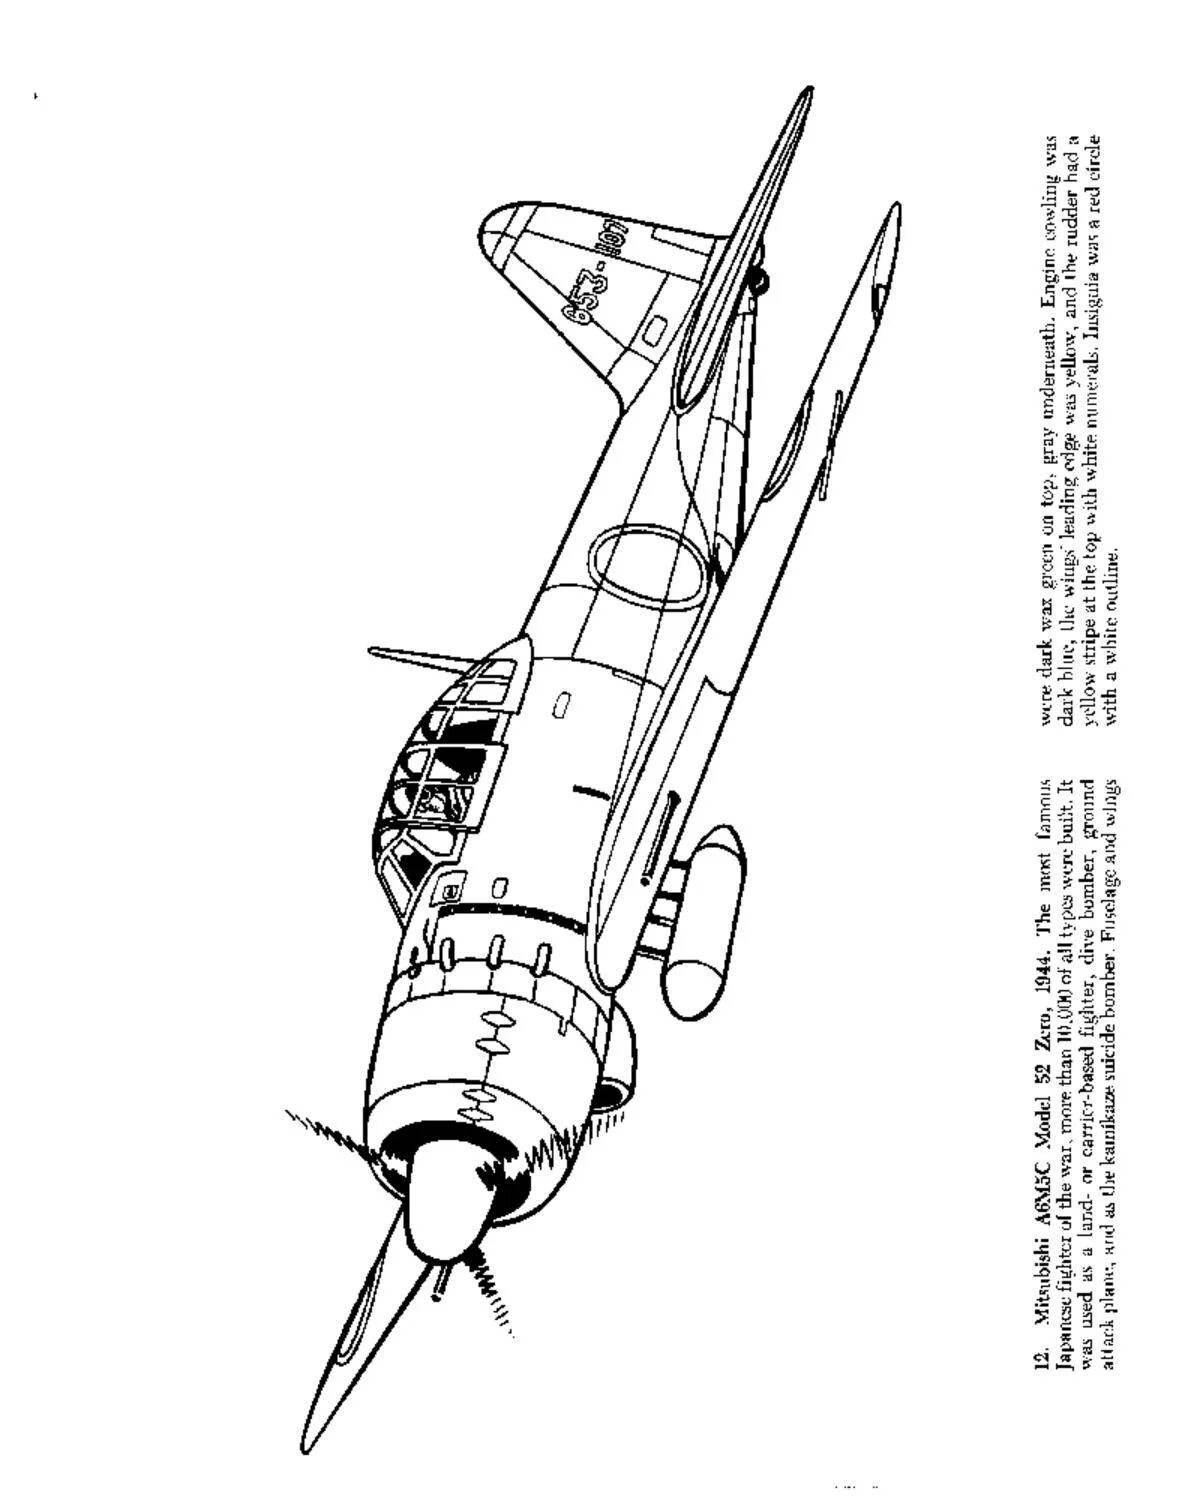 Cute plane eater coloring page